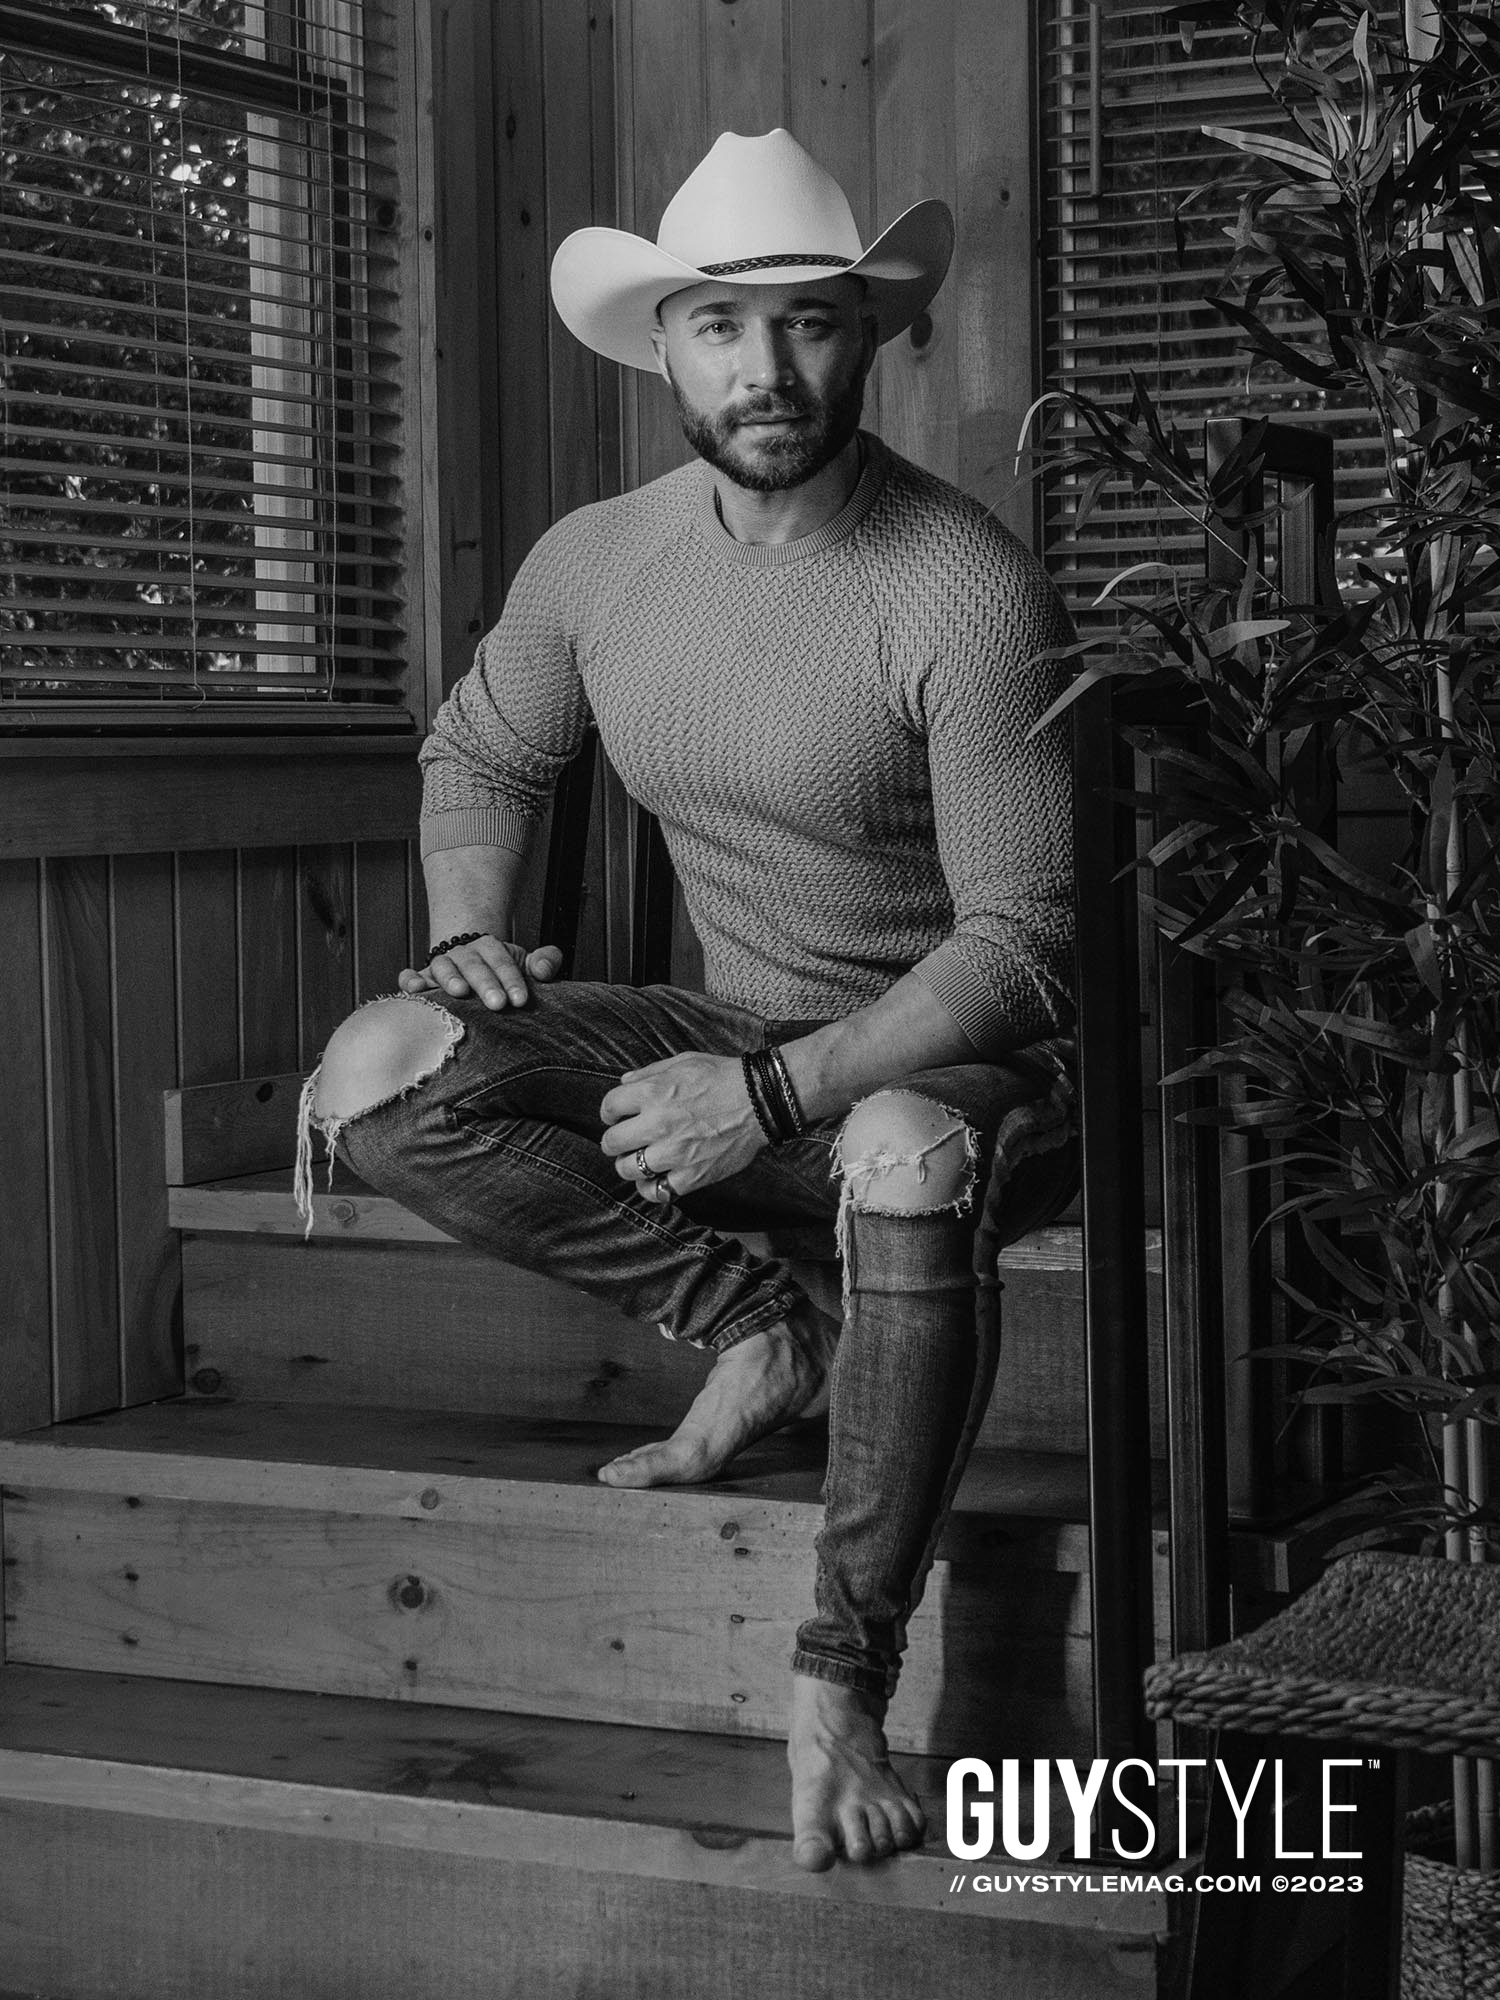 Cabin and the Woods – A Sensuous Male Boudoir Photo Story ft. Cocky Cowboy – Fine Art Male Boudoir Photography by Maxwell Alexander – NYC Men's Boudoir Experience – Best Male Dudeoir in New York